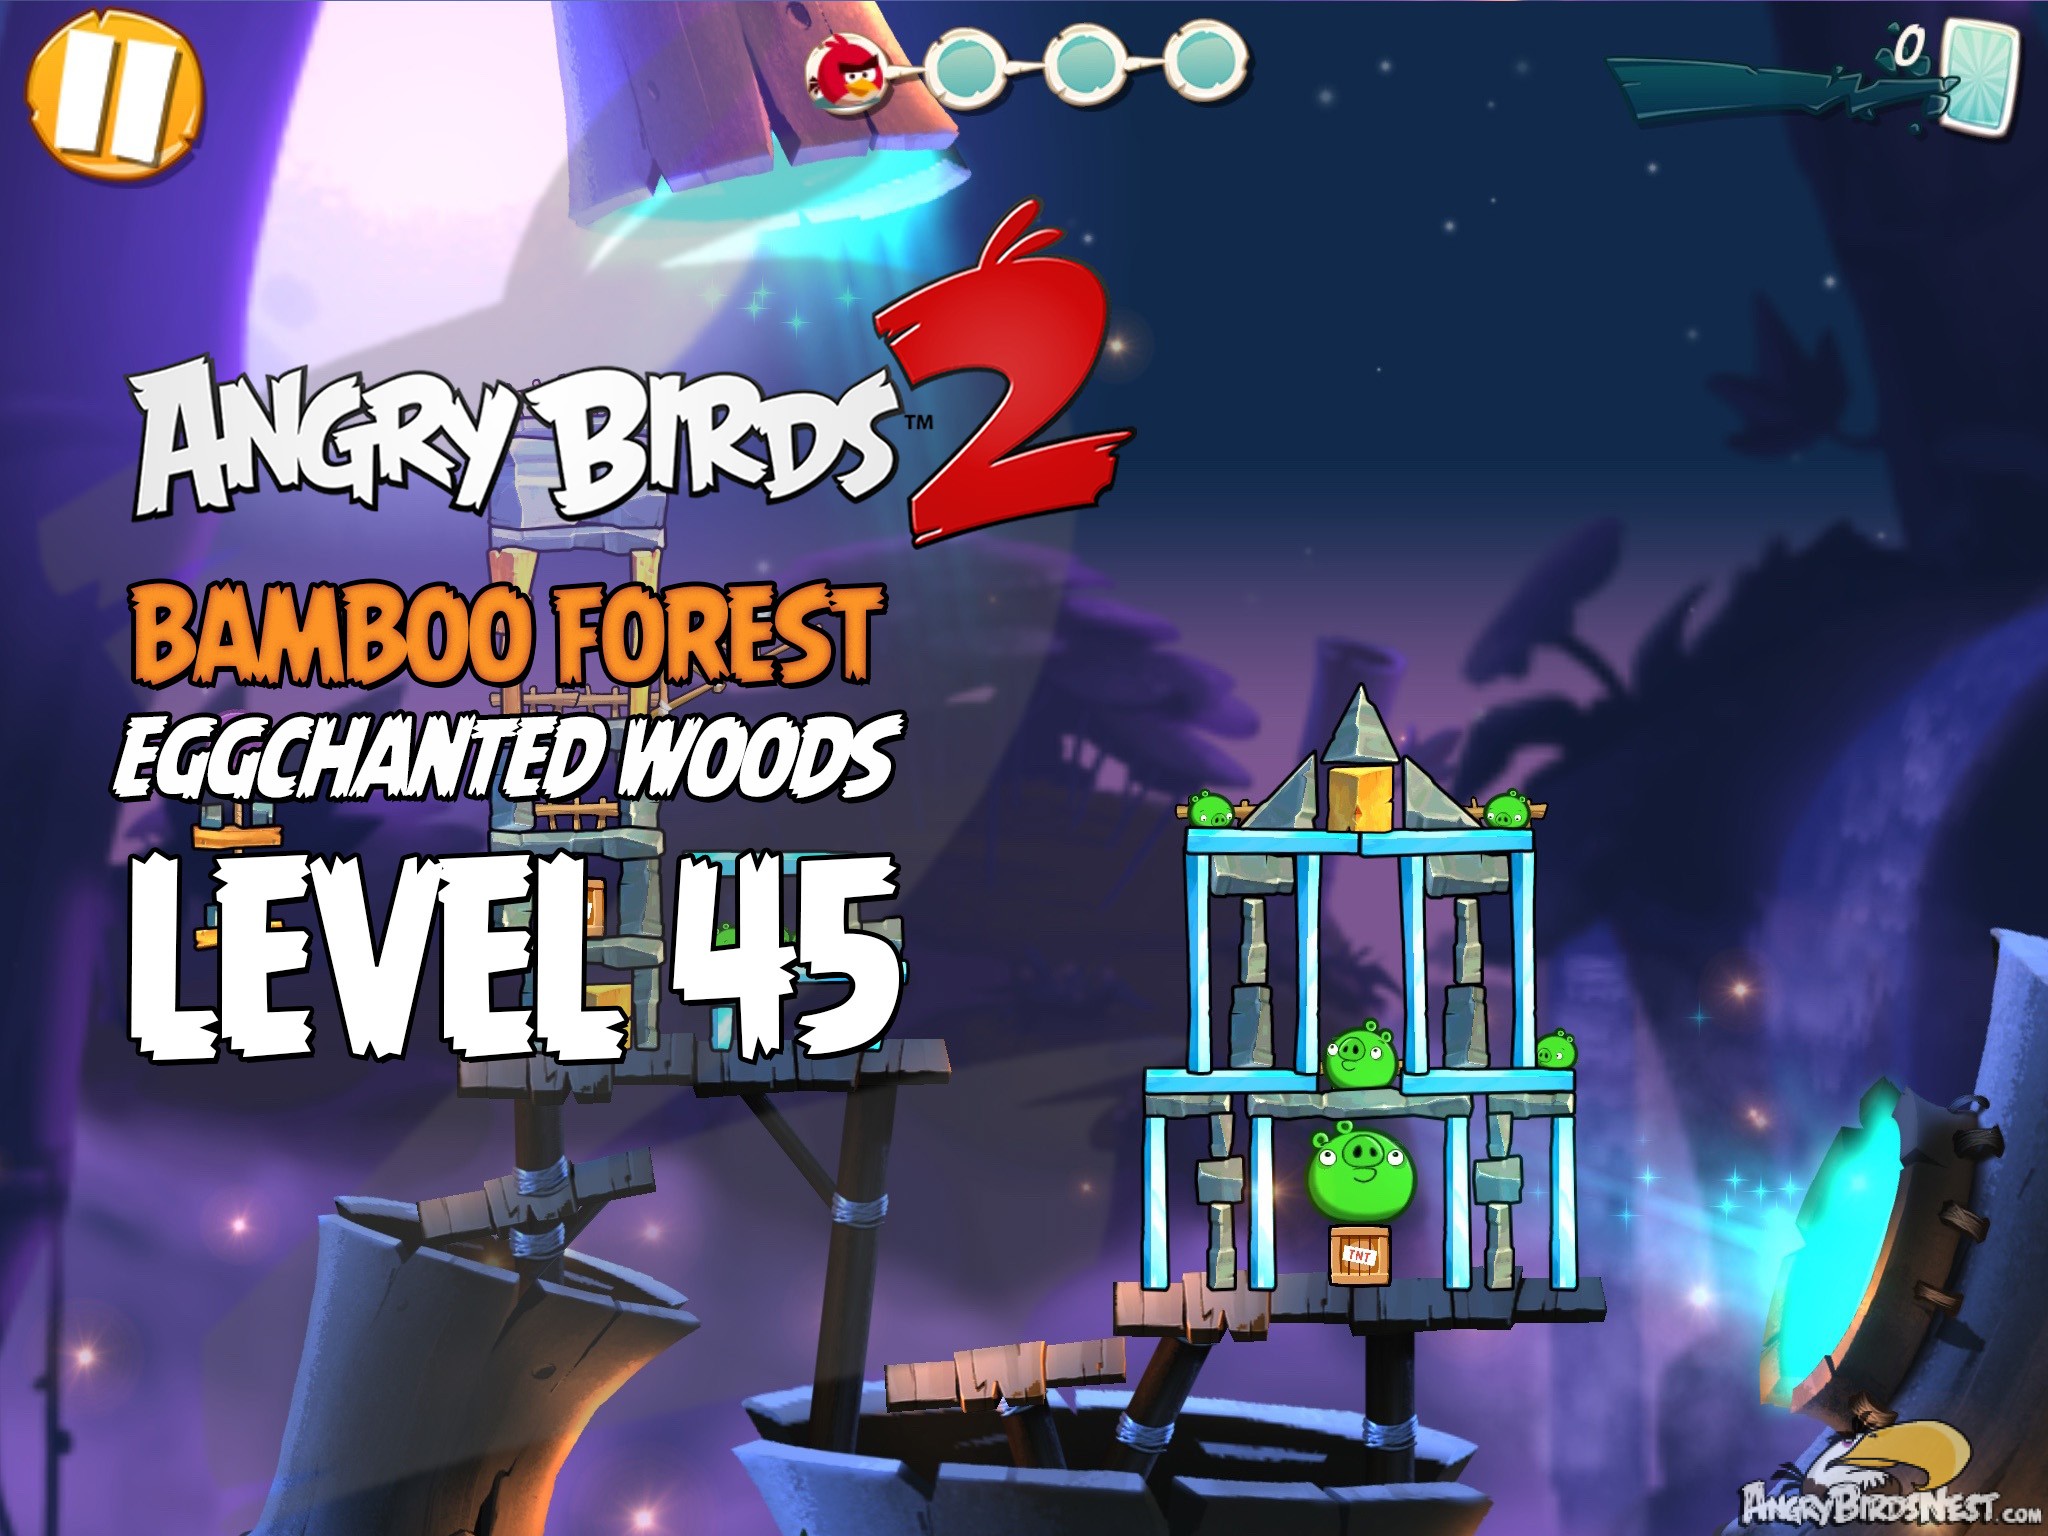 Angry Birds 2 Bamboo Forest Eggchanted Woods Level 45